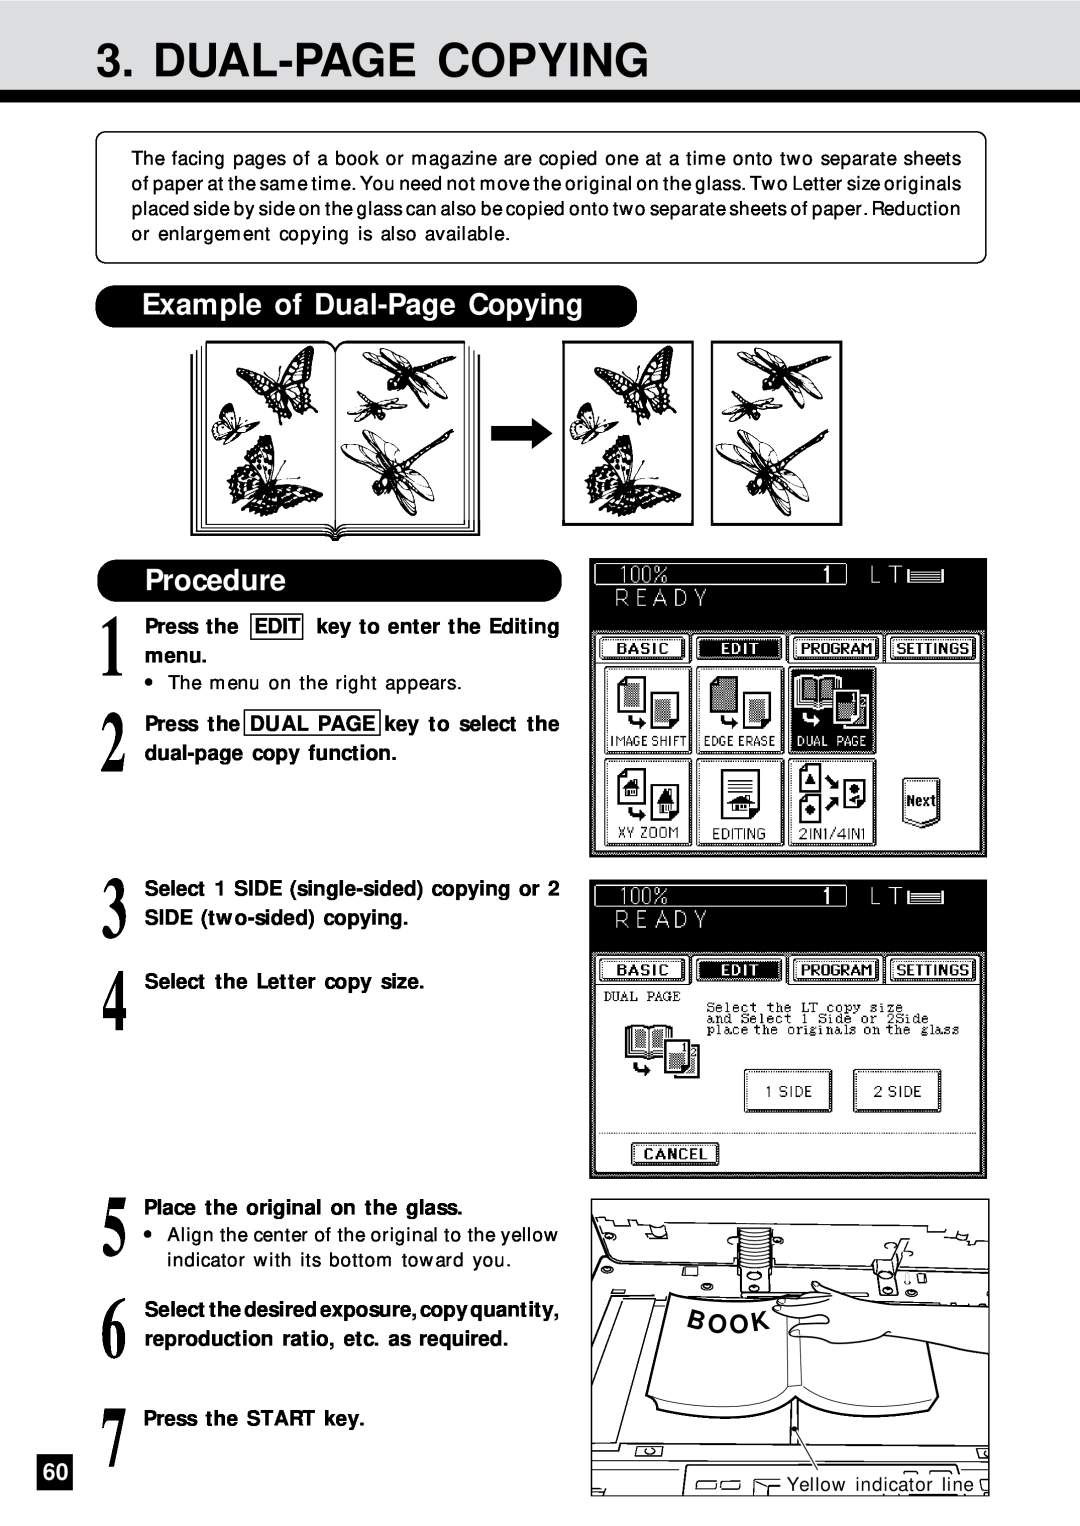 Sharp AR-650 Example of Dual-Page Copying Procedure, O Ok, Select the Letter copy size, Press the START key 